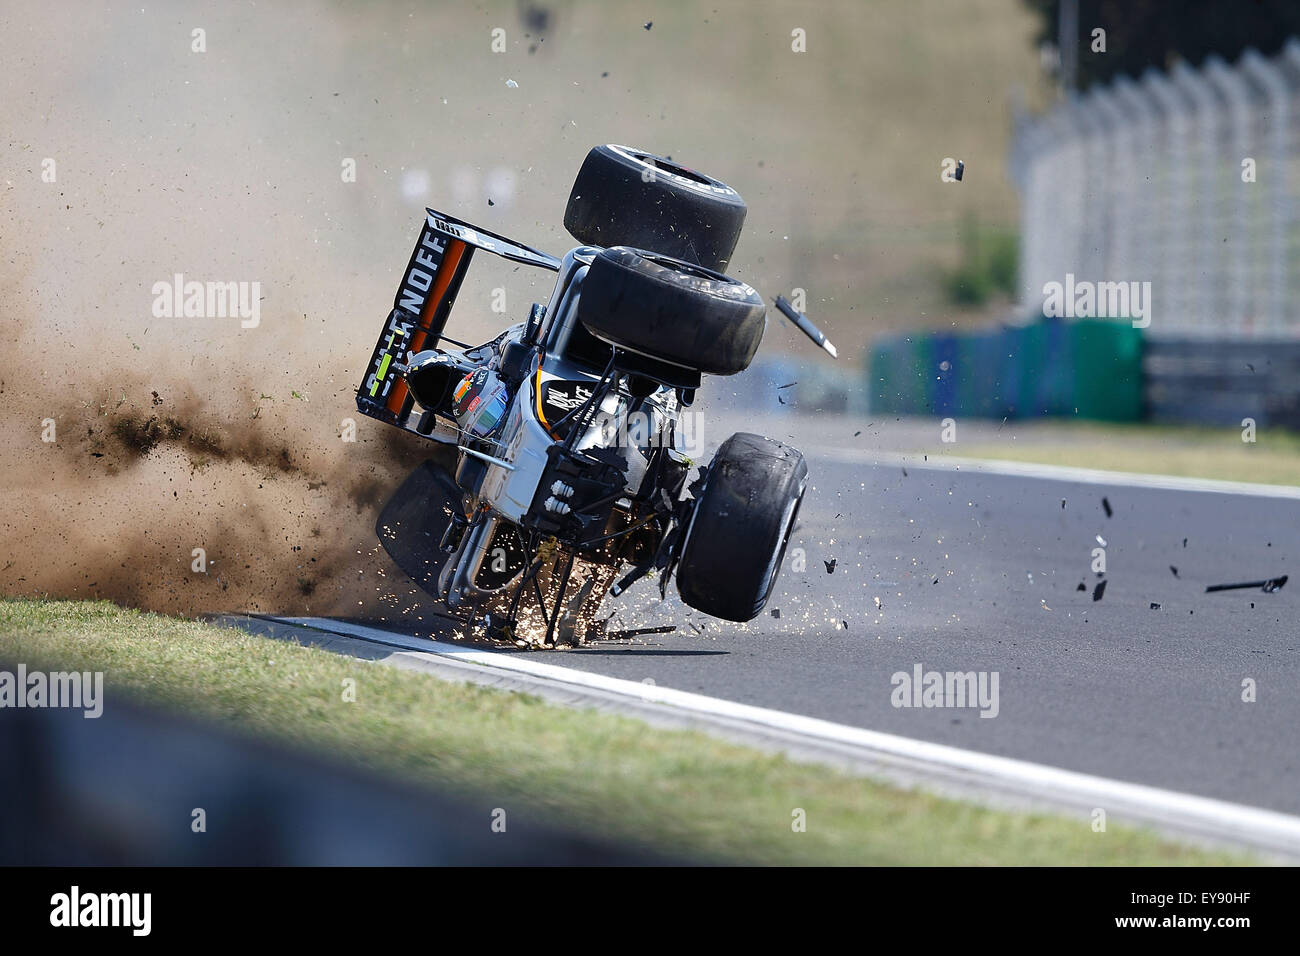 Budapest, Hungary. 24th July, 2015. SERGIO PEREZ of Mexico and Sahara Force India F1 Team has a crash during the first free practice session of the 2015 Formula 1 Hungarian Grand Prix at the Hungaroring in Budapest, Hungary. (Credit Image: © James Gasperotti via ZUMA Wire) Credit:  ZUMA Press, Inc./Alamy Live News Stock Photo